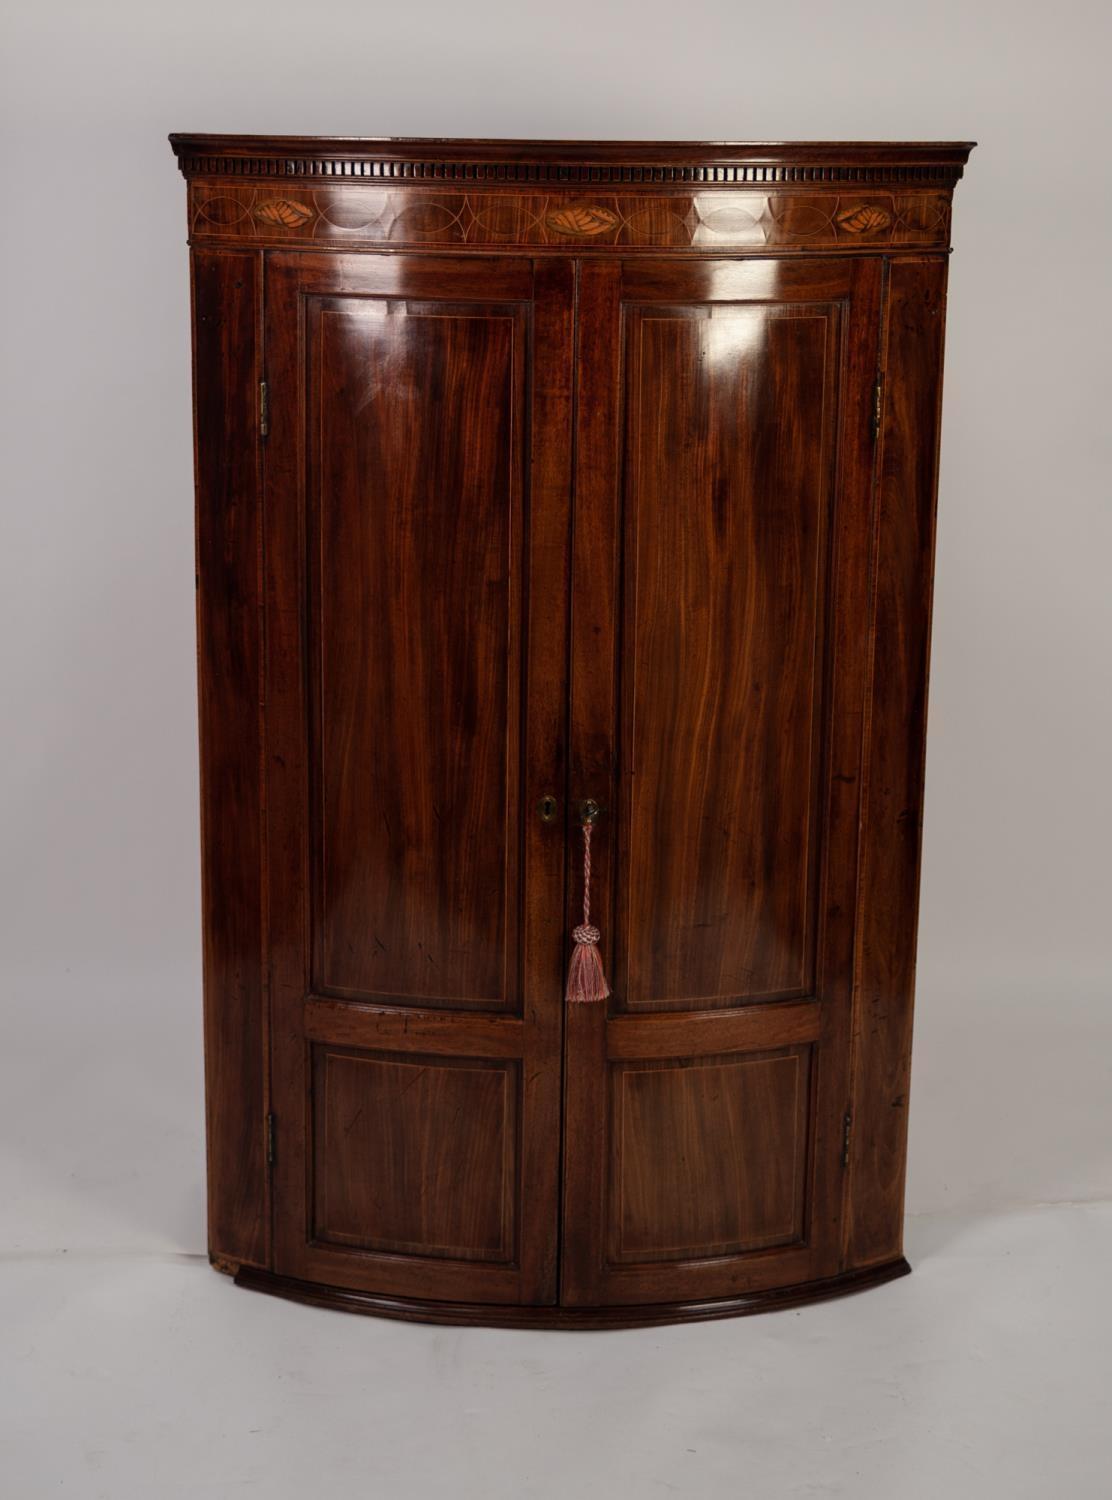 NINETEENTH CENTURY INLAID MAHOGANY BOW FRONTED CORNER CUPBOARD, the dentil moulded cornice above a